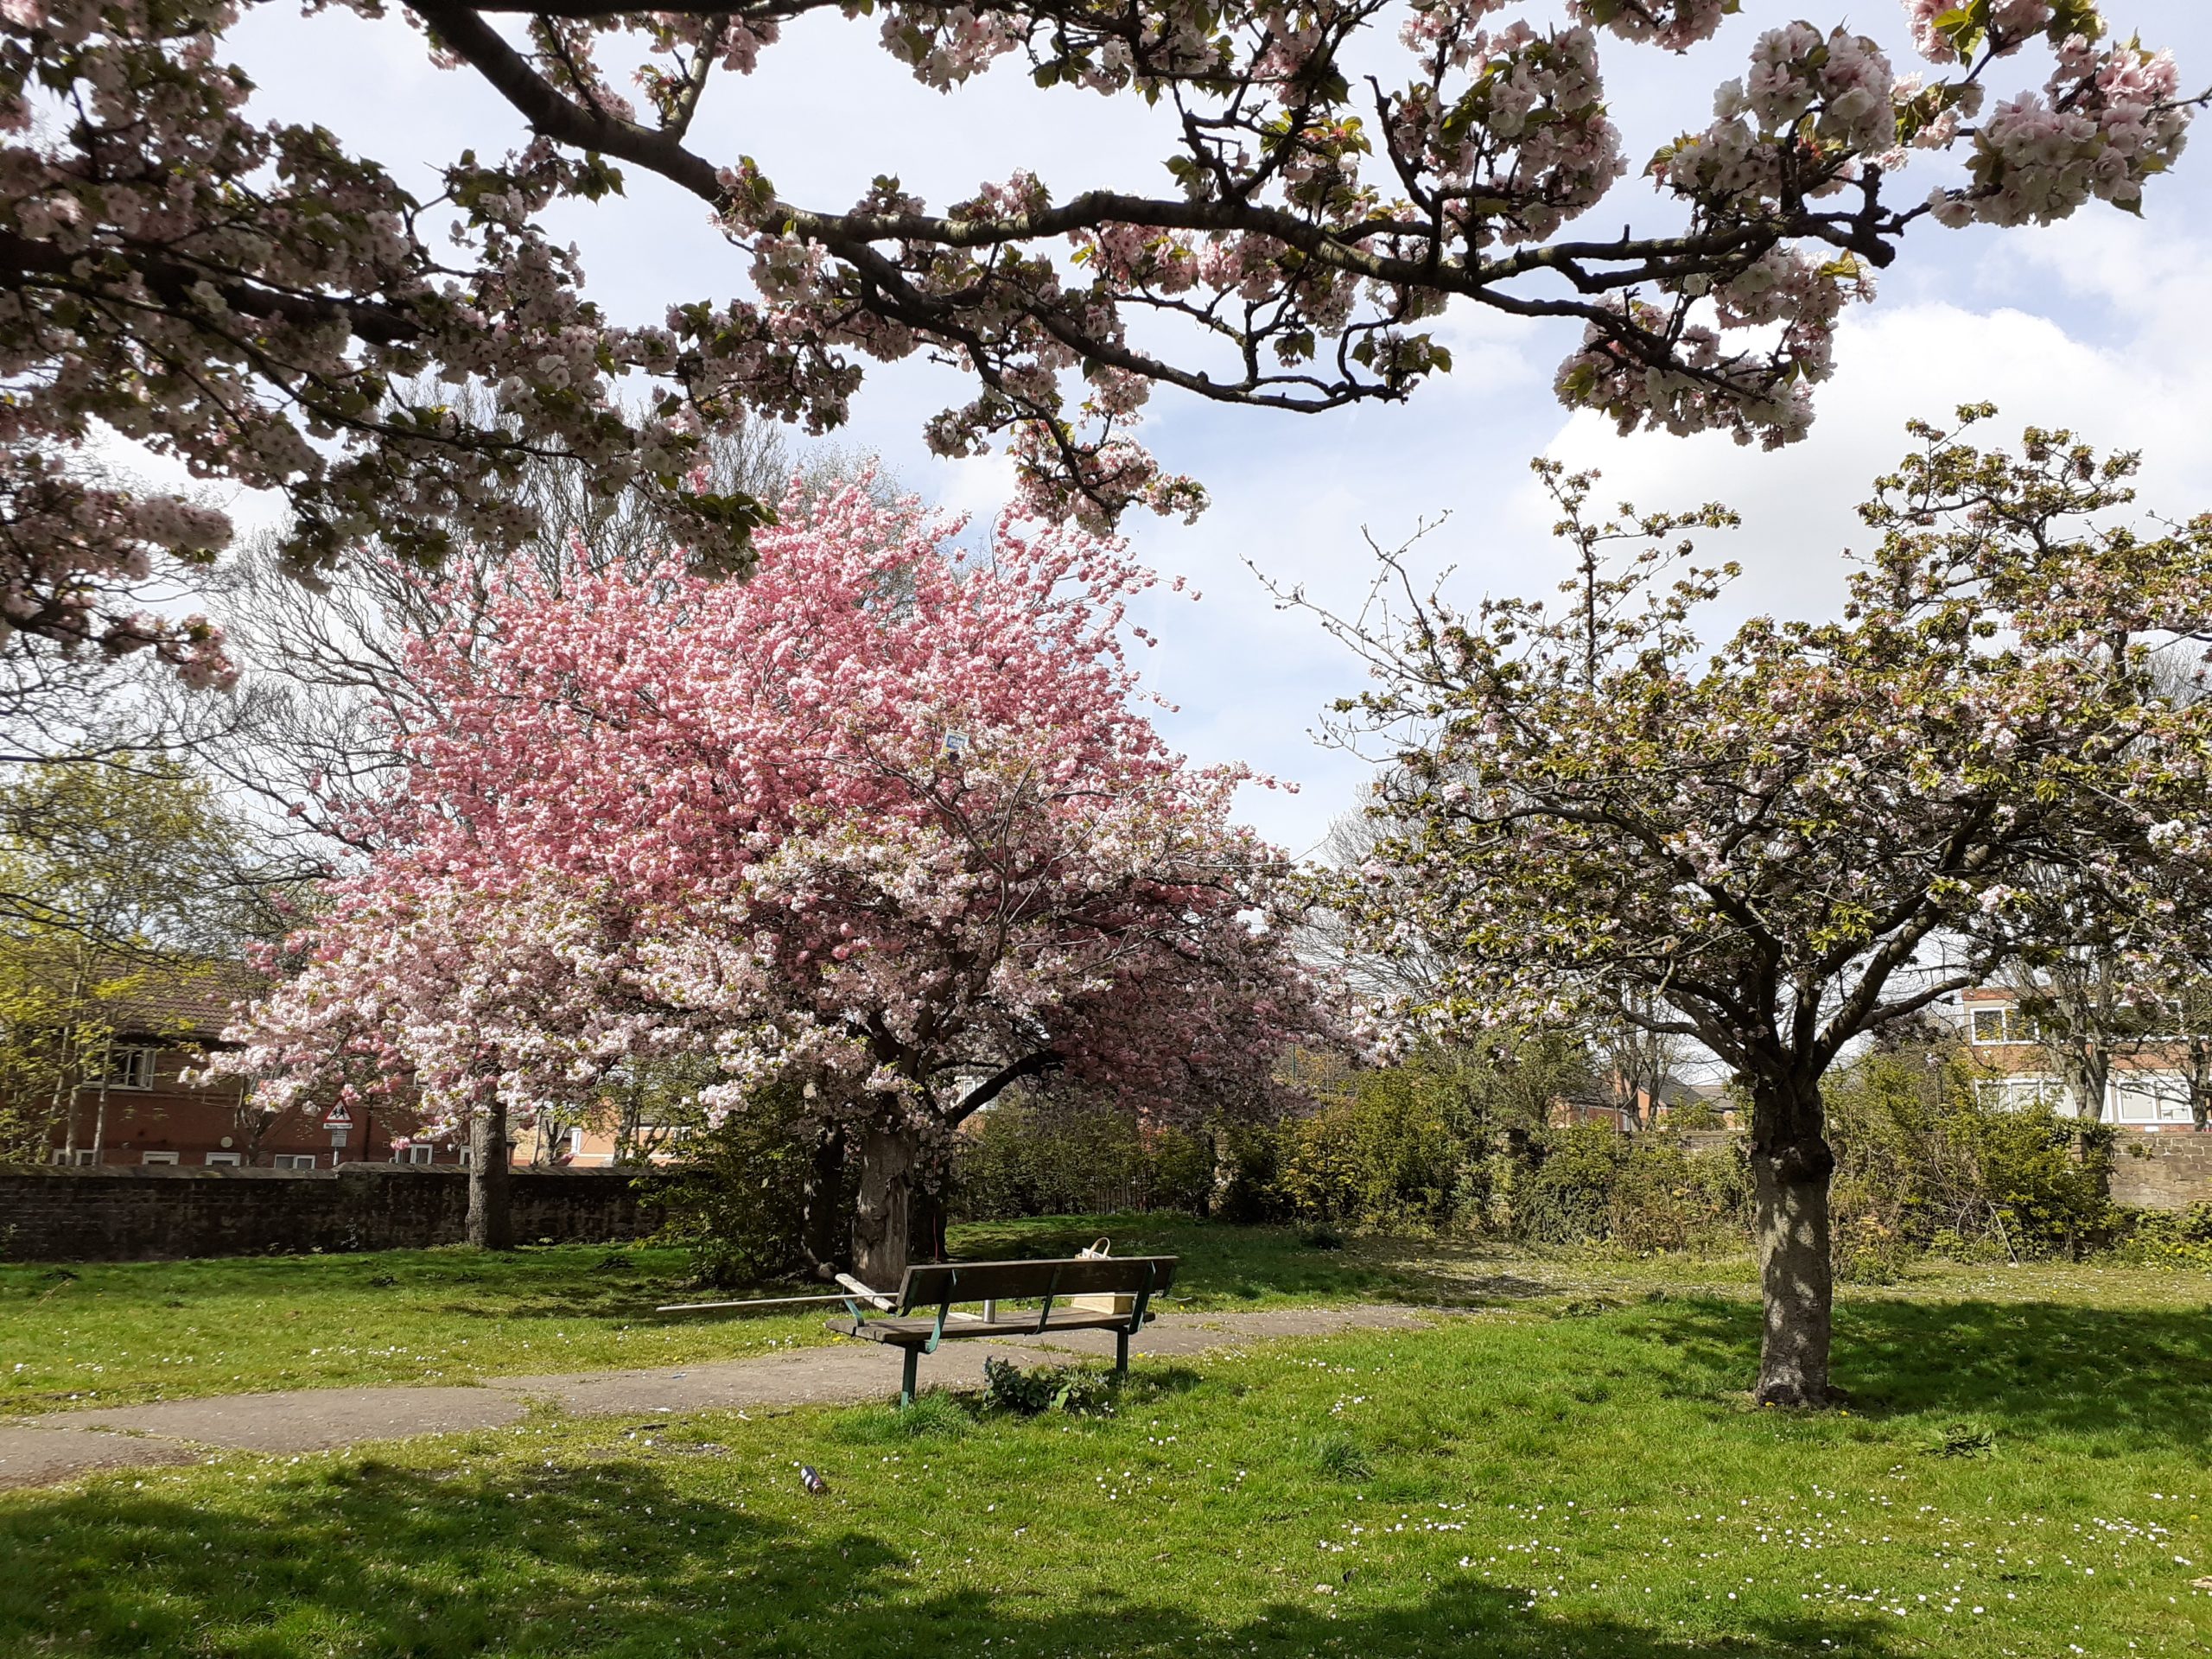 pink and while blossoms in Christ Church gardens surrounding the bench and path